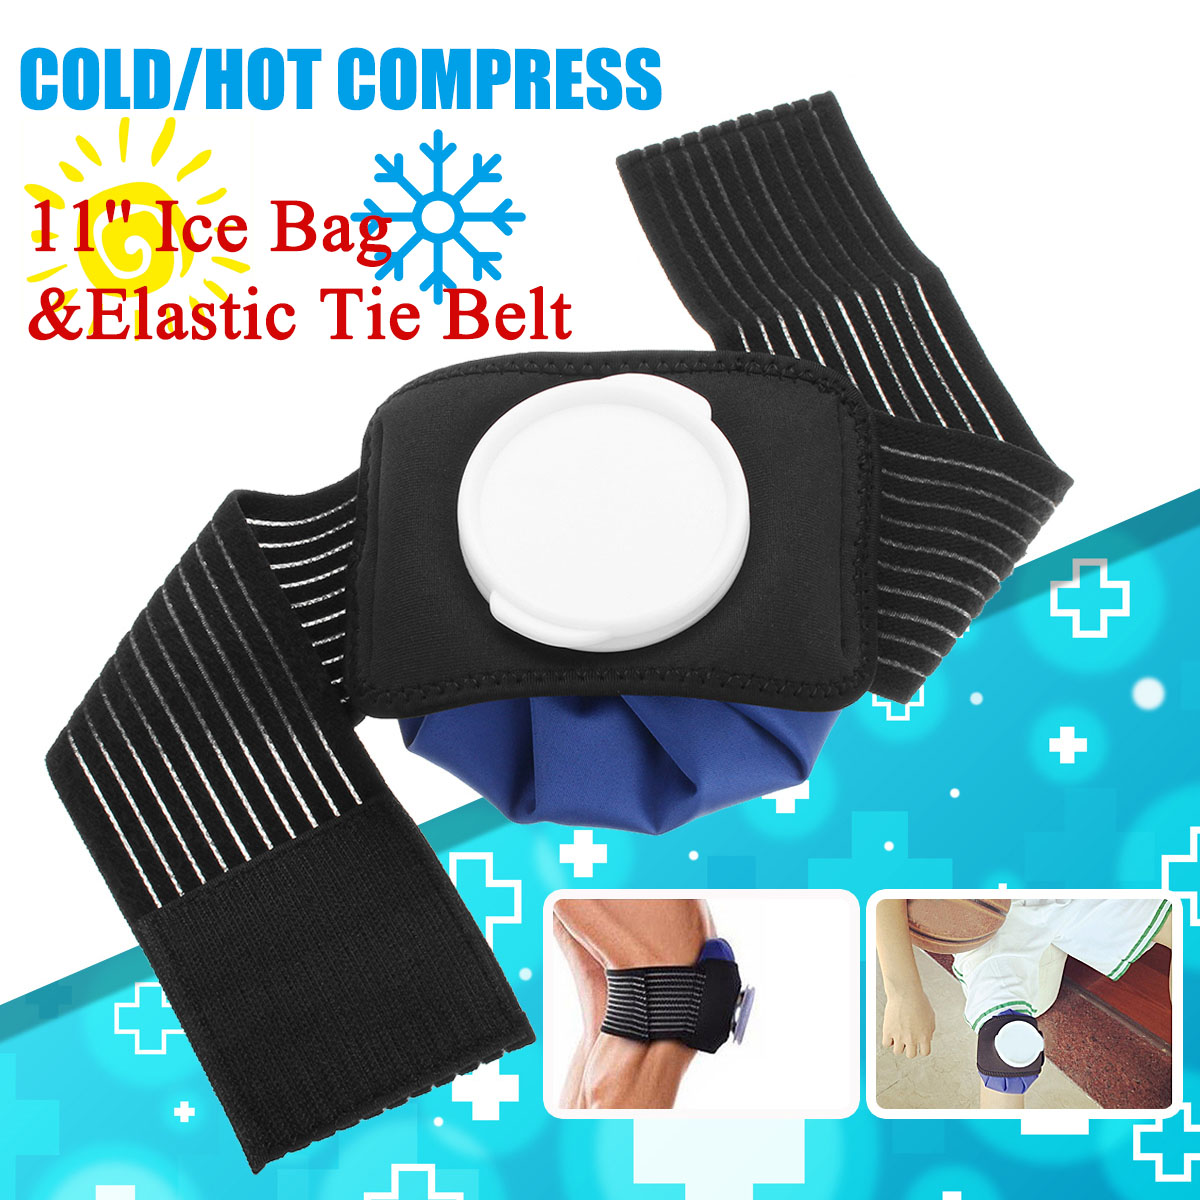 Ice-Bag-Pack-Pain-Relief-Cold-Broad-Knee-Shoulder-Injuries-Therapy-Strap-Wrap-Elastic-Tie-Belt-1551776